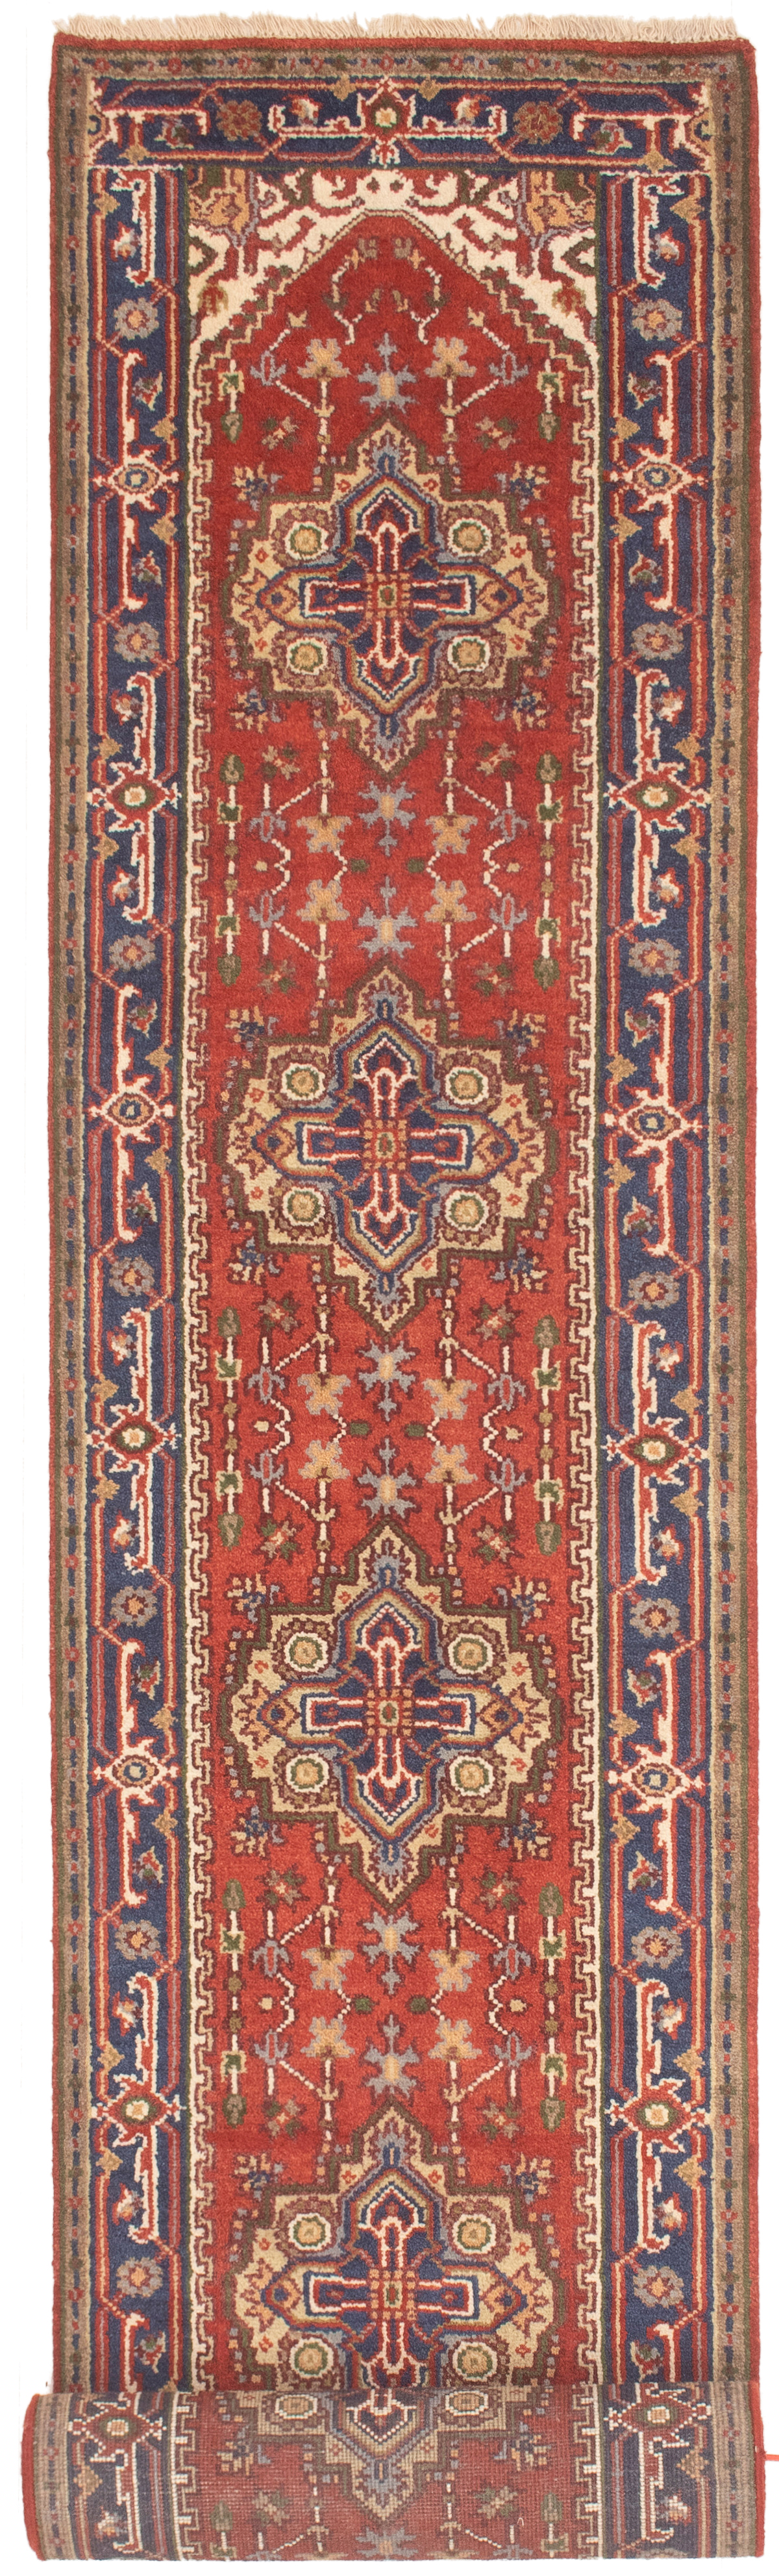 Hand-knotted Serapi Heritage Copper Wool Rug 2'7" x 16'2"  Size: 2'7" x 16'2"  